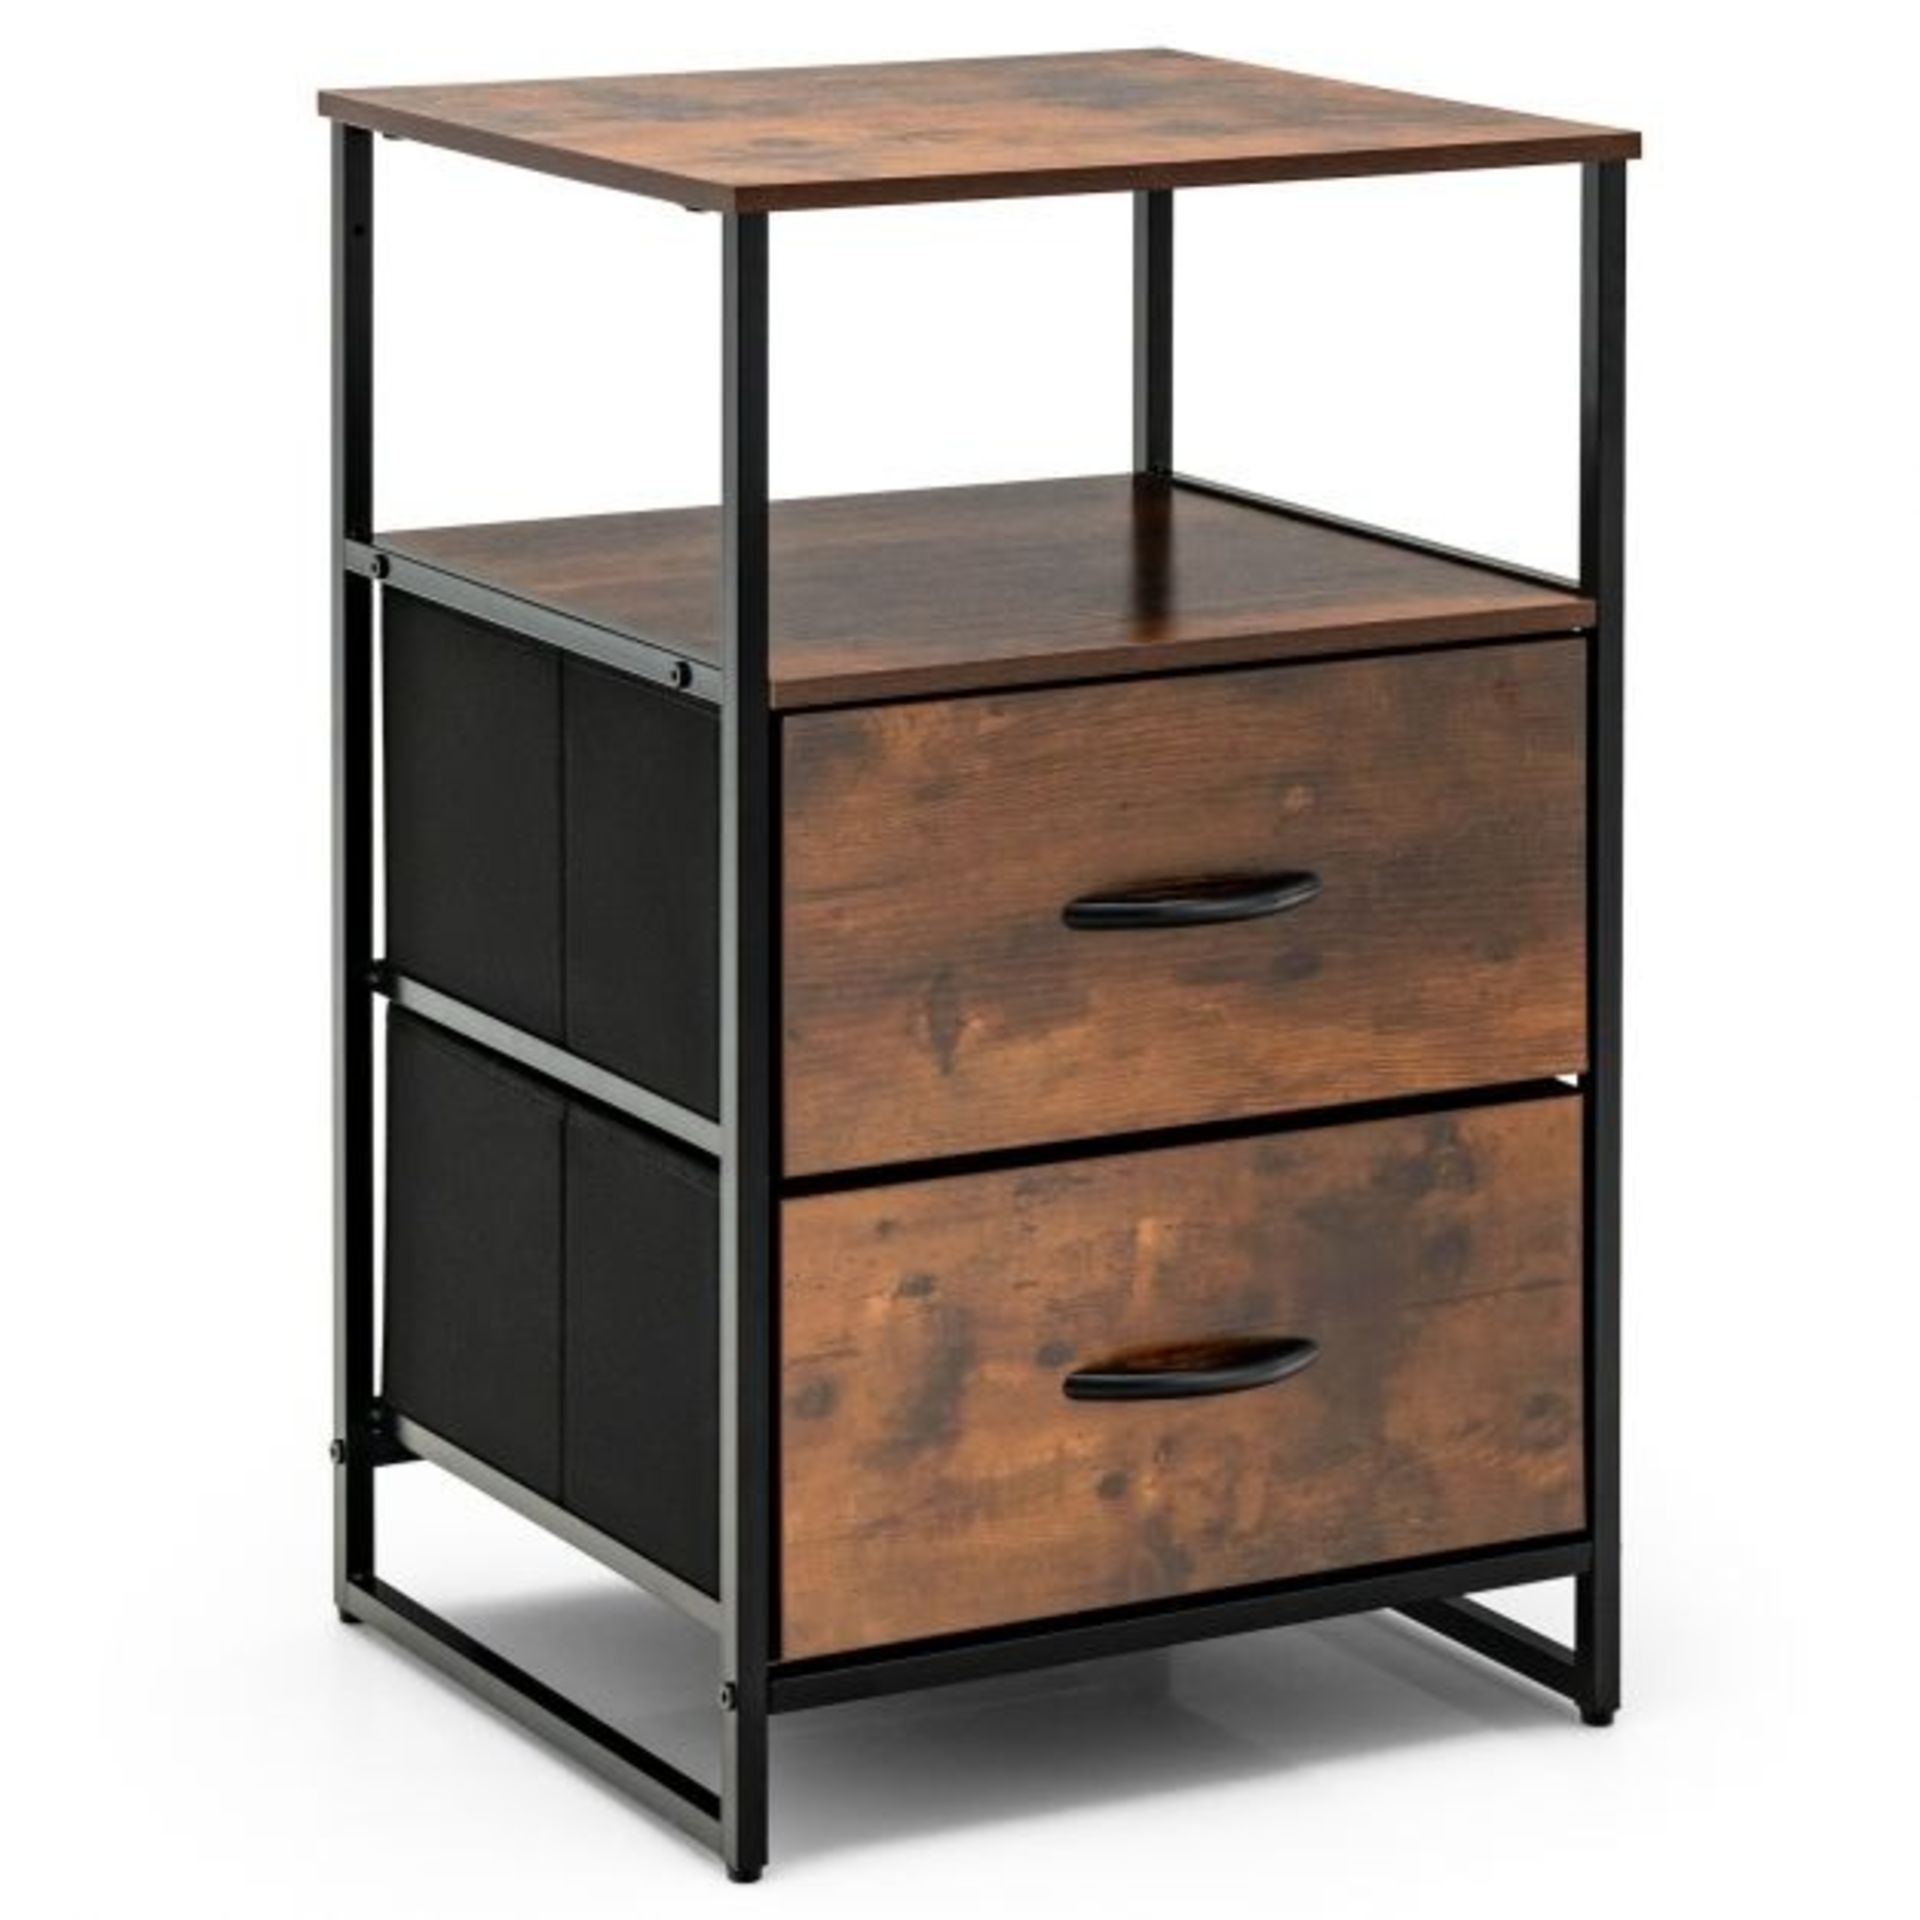 Metal Frame Storage Cabinet with 2 Drawers and Wooden Top - ER54